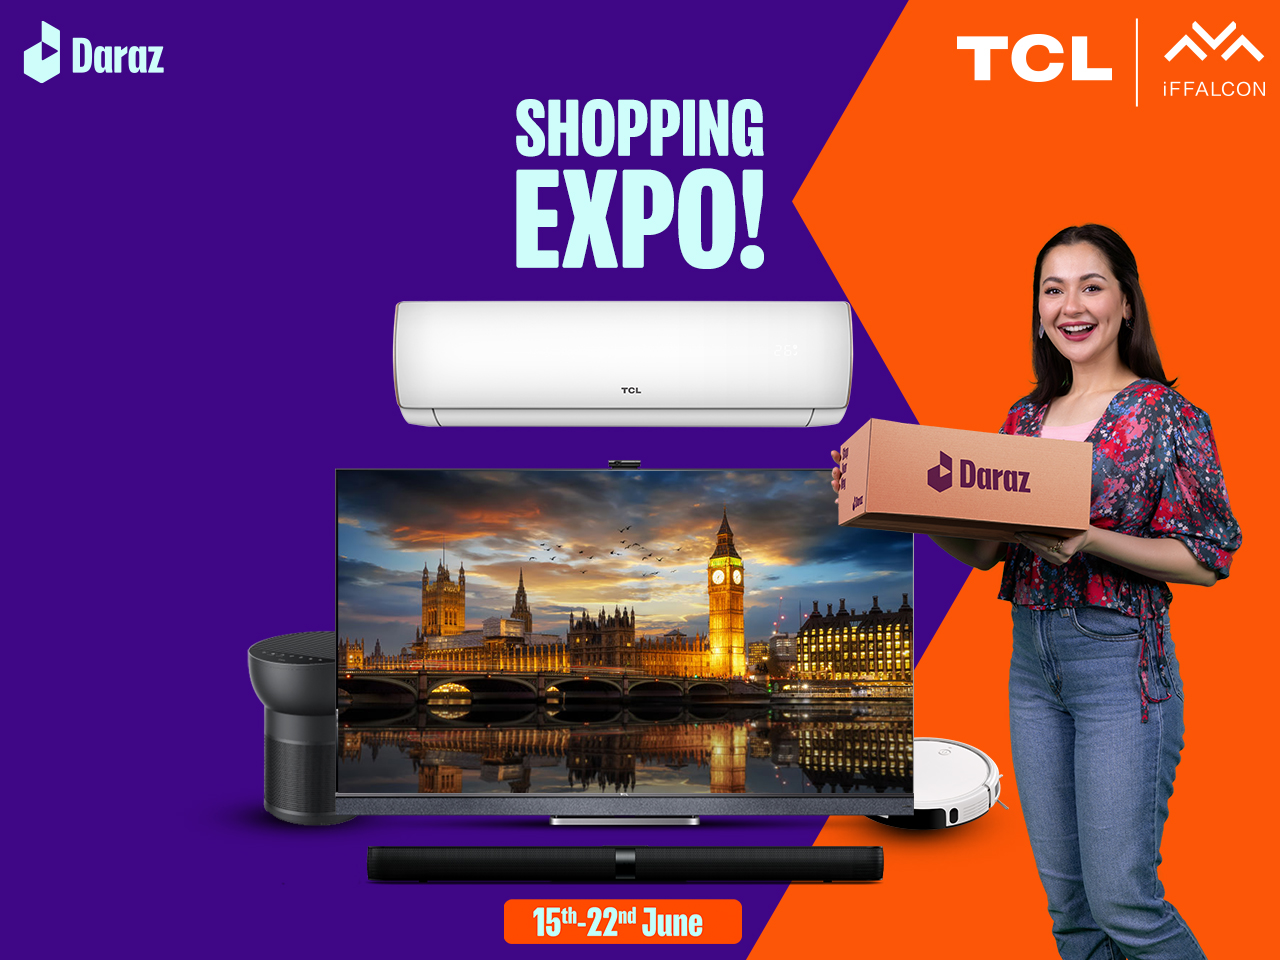 TCL announces sponsorship with Daraz for the biggest online sale of the year!